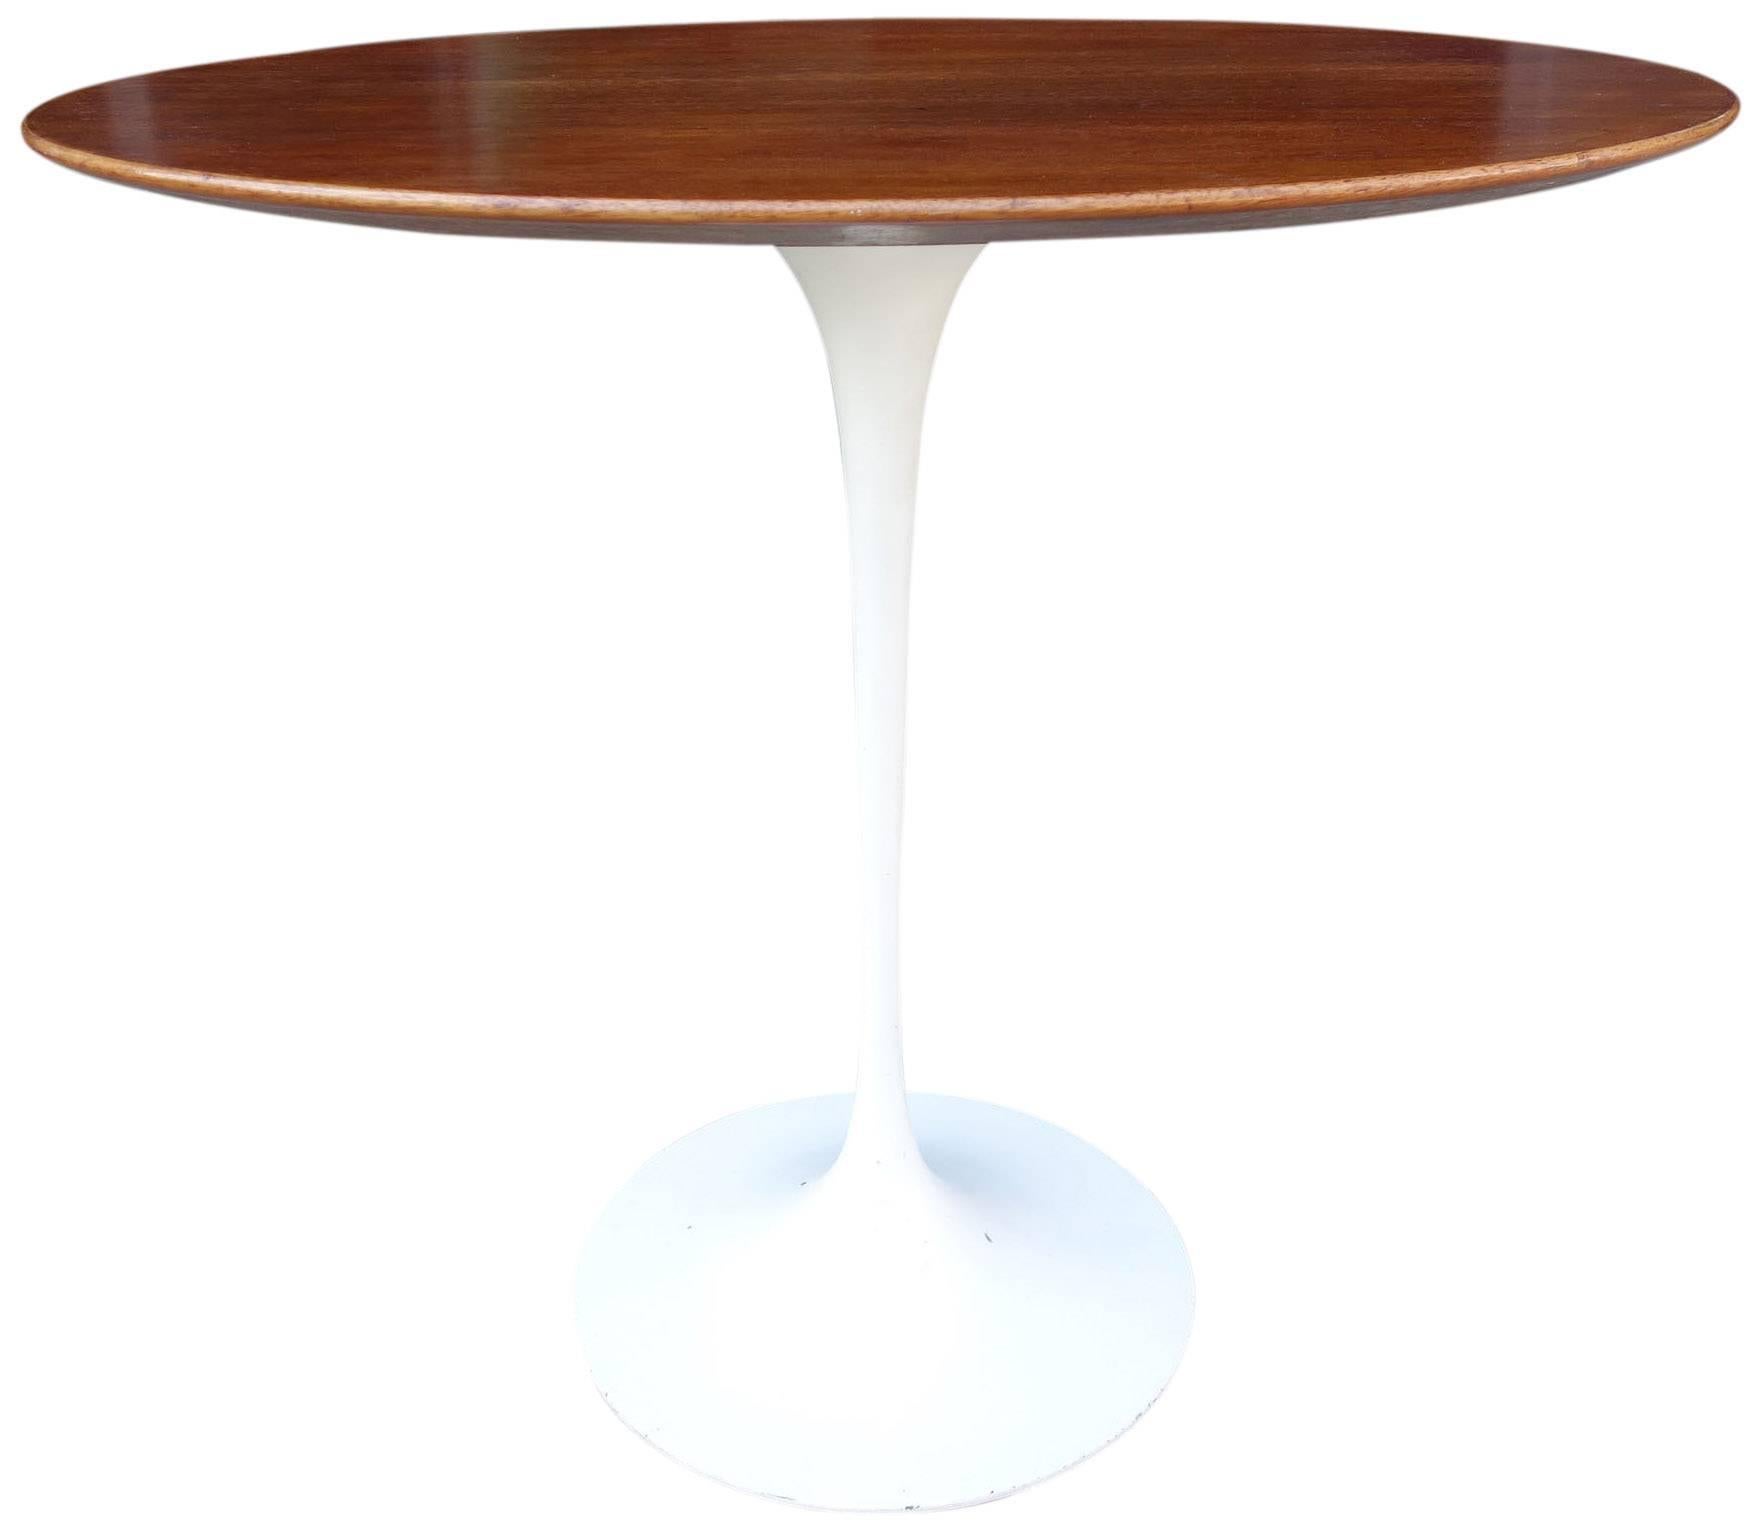 Wonderful condition Mid-Century side or end table by Saarinen for Knoll. Walnut top on white enameled base.

Early example.